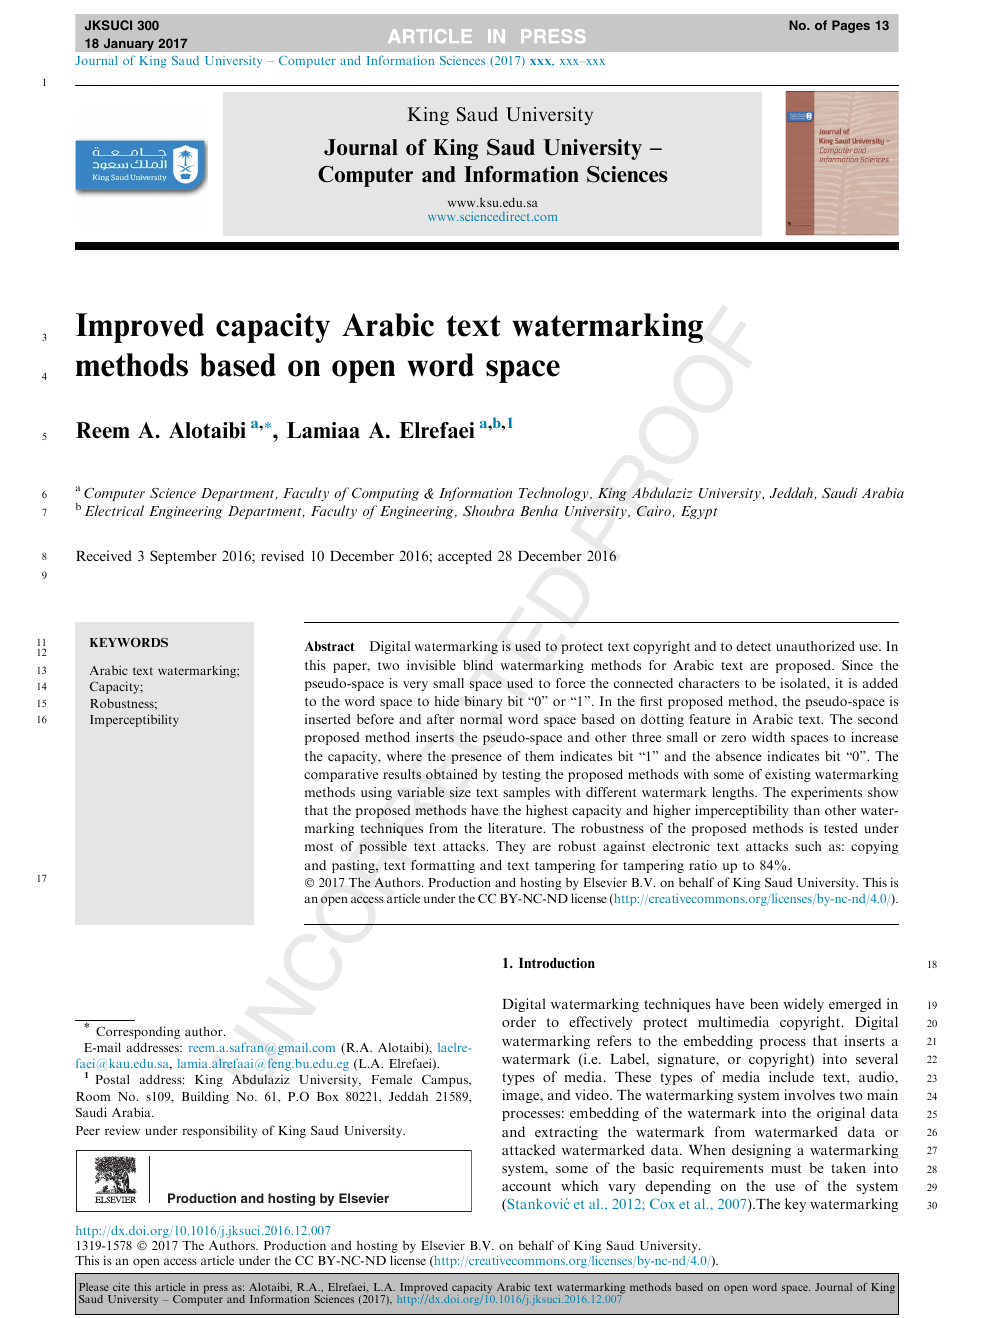 Improved Capacity Arabic Text Watermarking Methods Based On Open Word Space Topic Of Research Paper In Computer And Information Sciences Download Scholarly Article Pdf And Read For Free On Cyberleninka Open